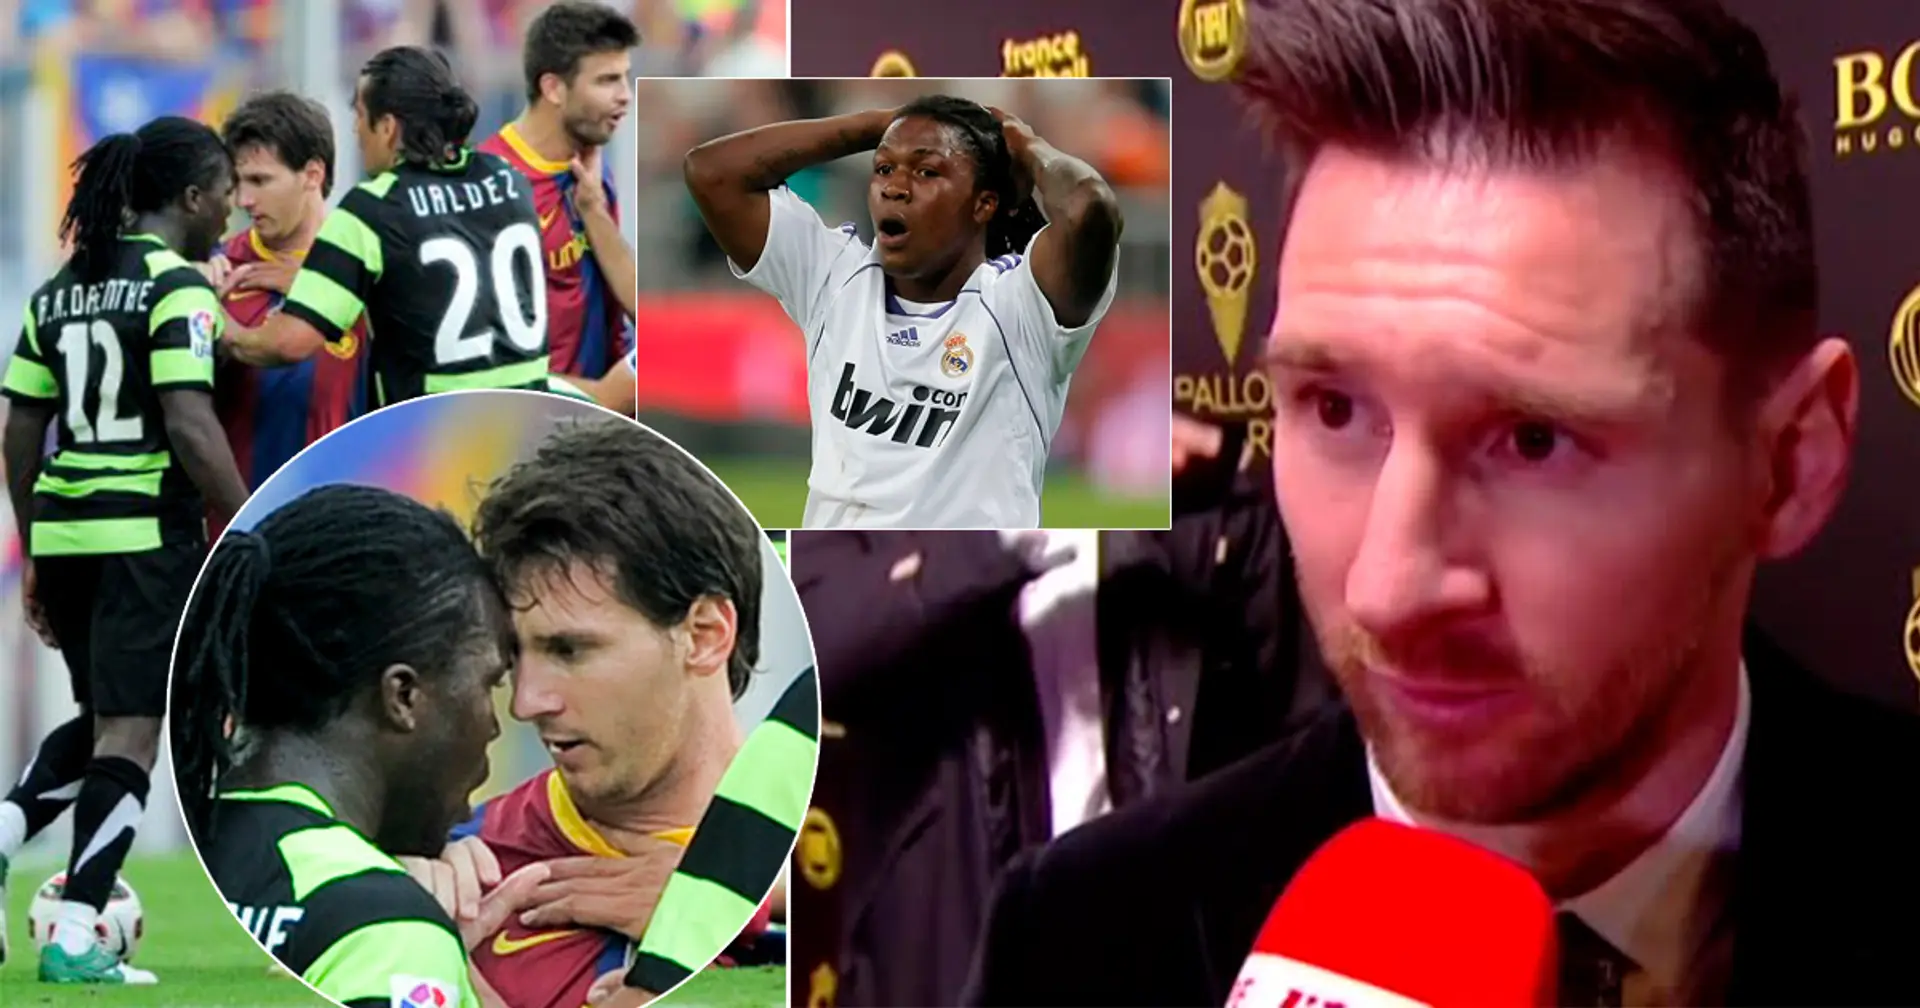 'We always have problems with each other': Why Drenthe accused Leo Messi of being racist